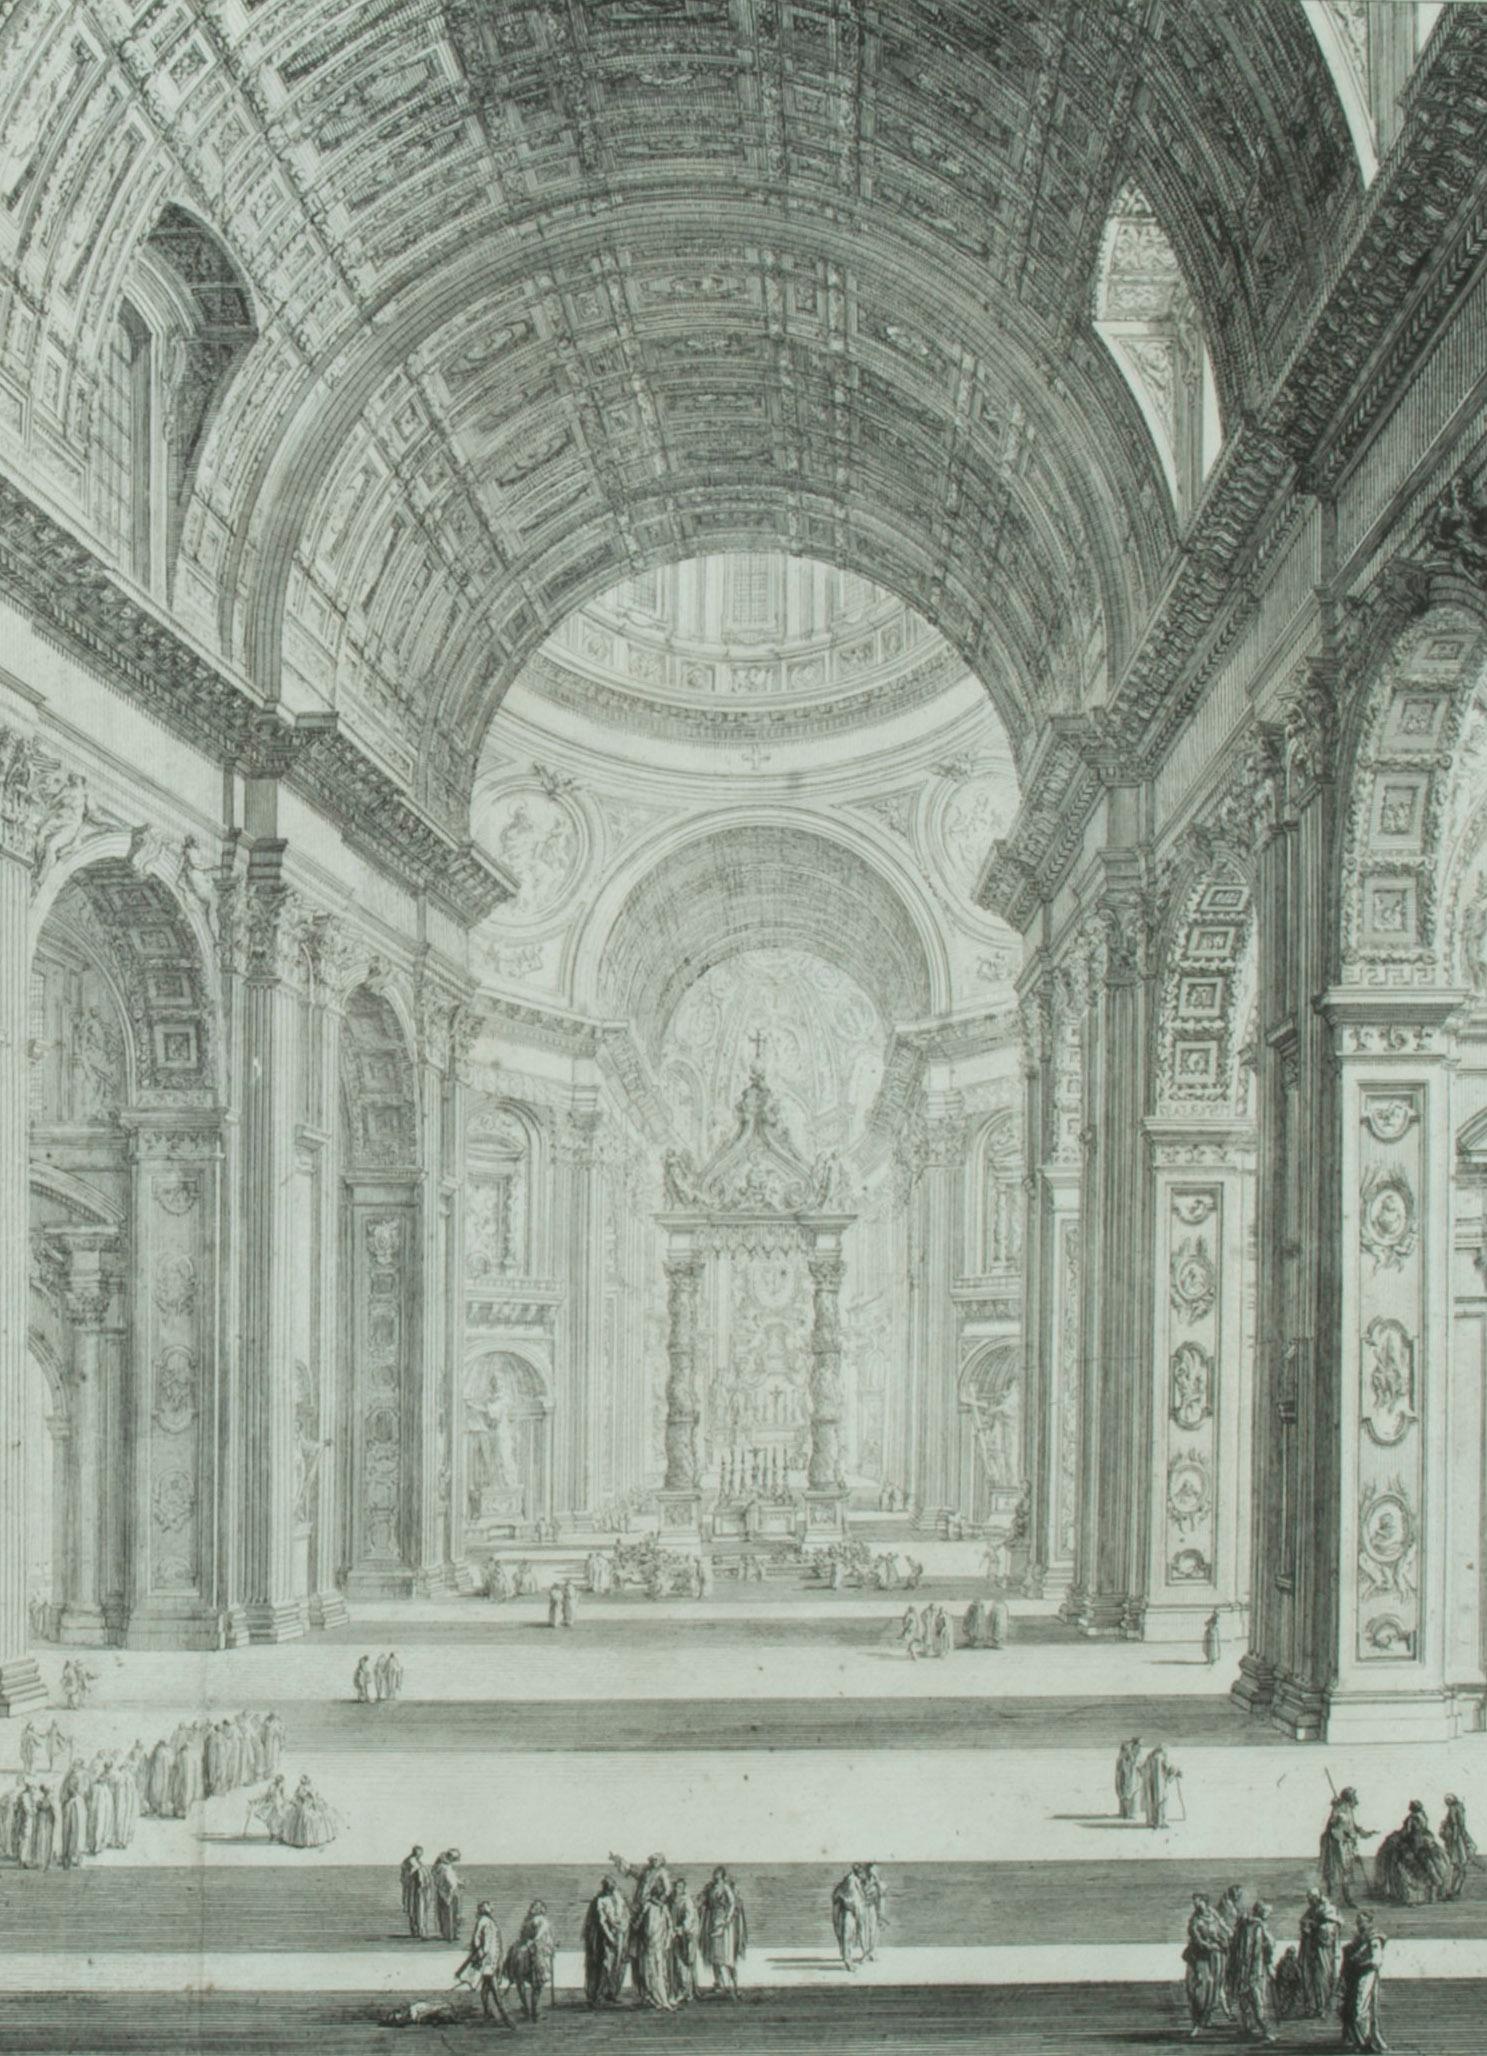 St. Peter's Interior with the Nave                       - Print by Giovanni Battista Piranesi